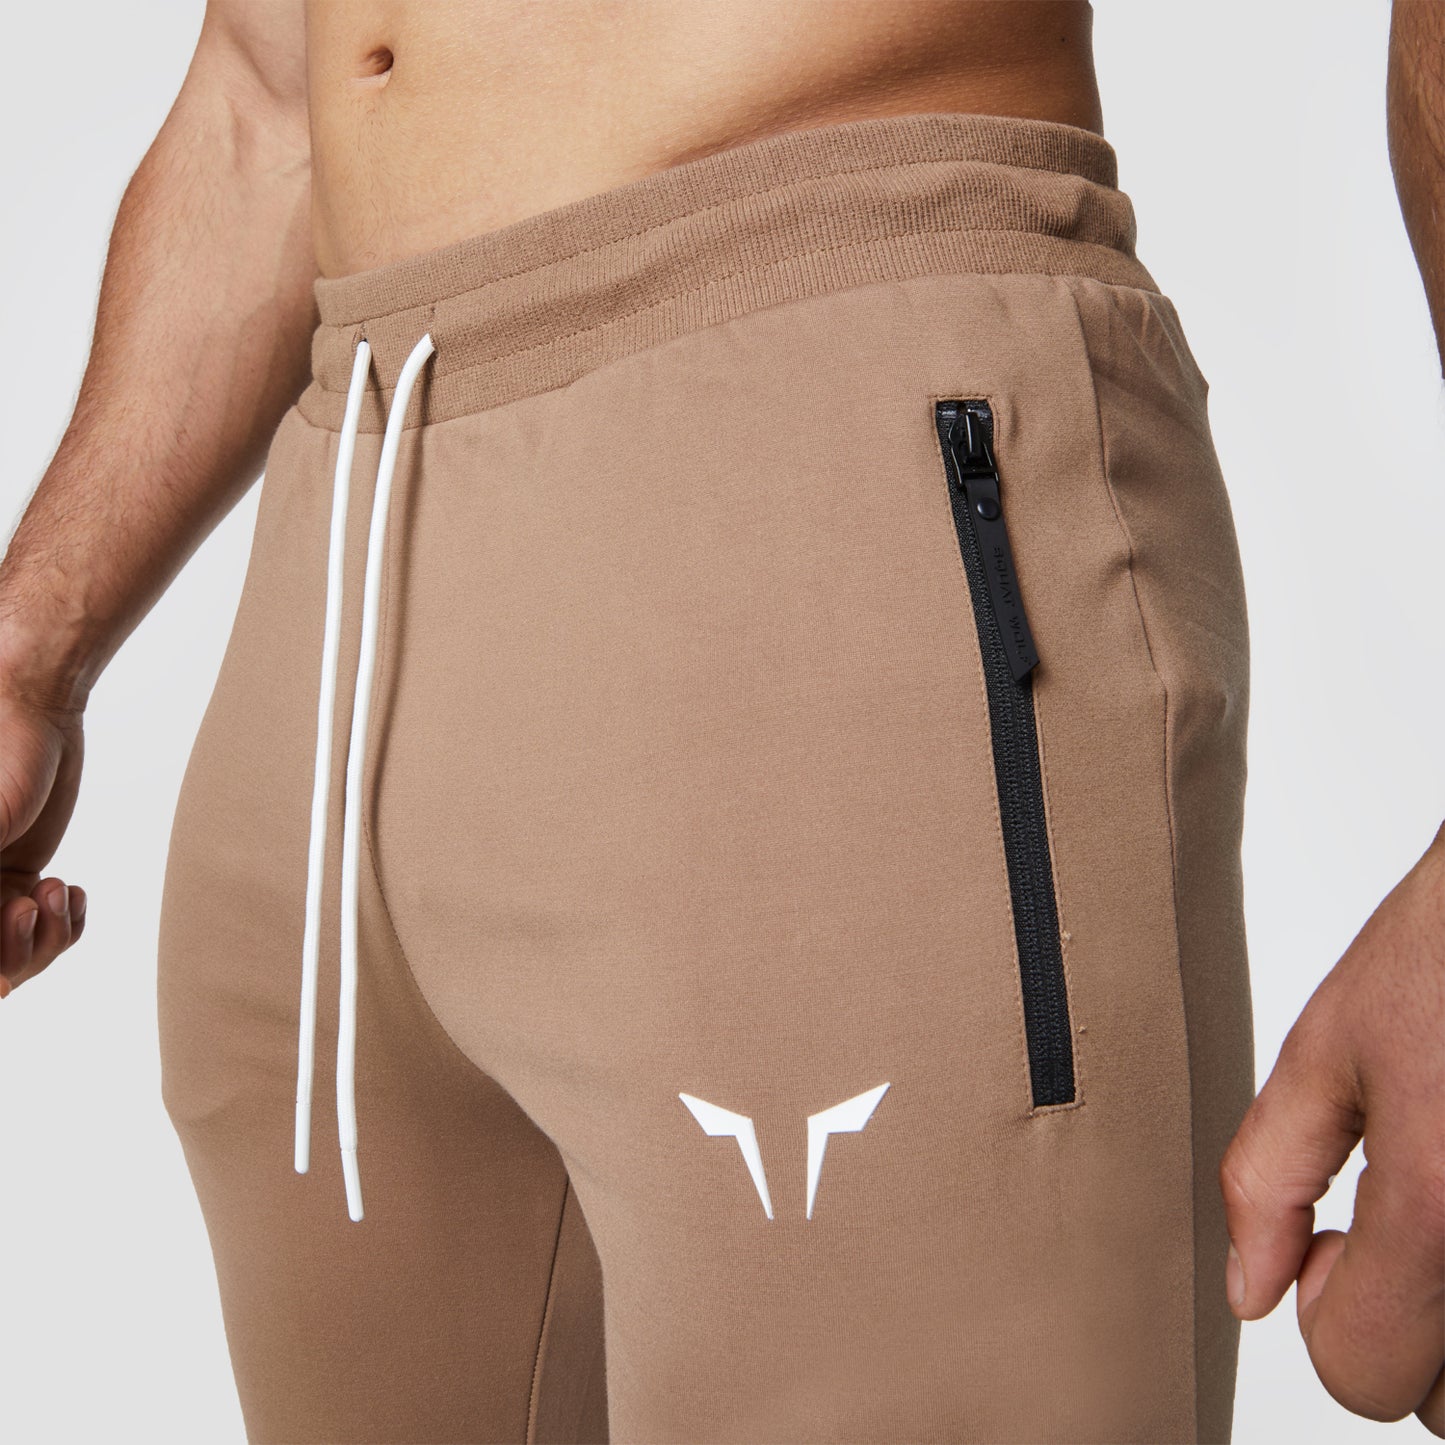 squatwolf-gym-wear-statement-classic-joggers-brown-workout-pants-for-men